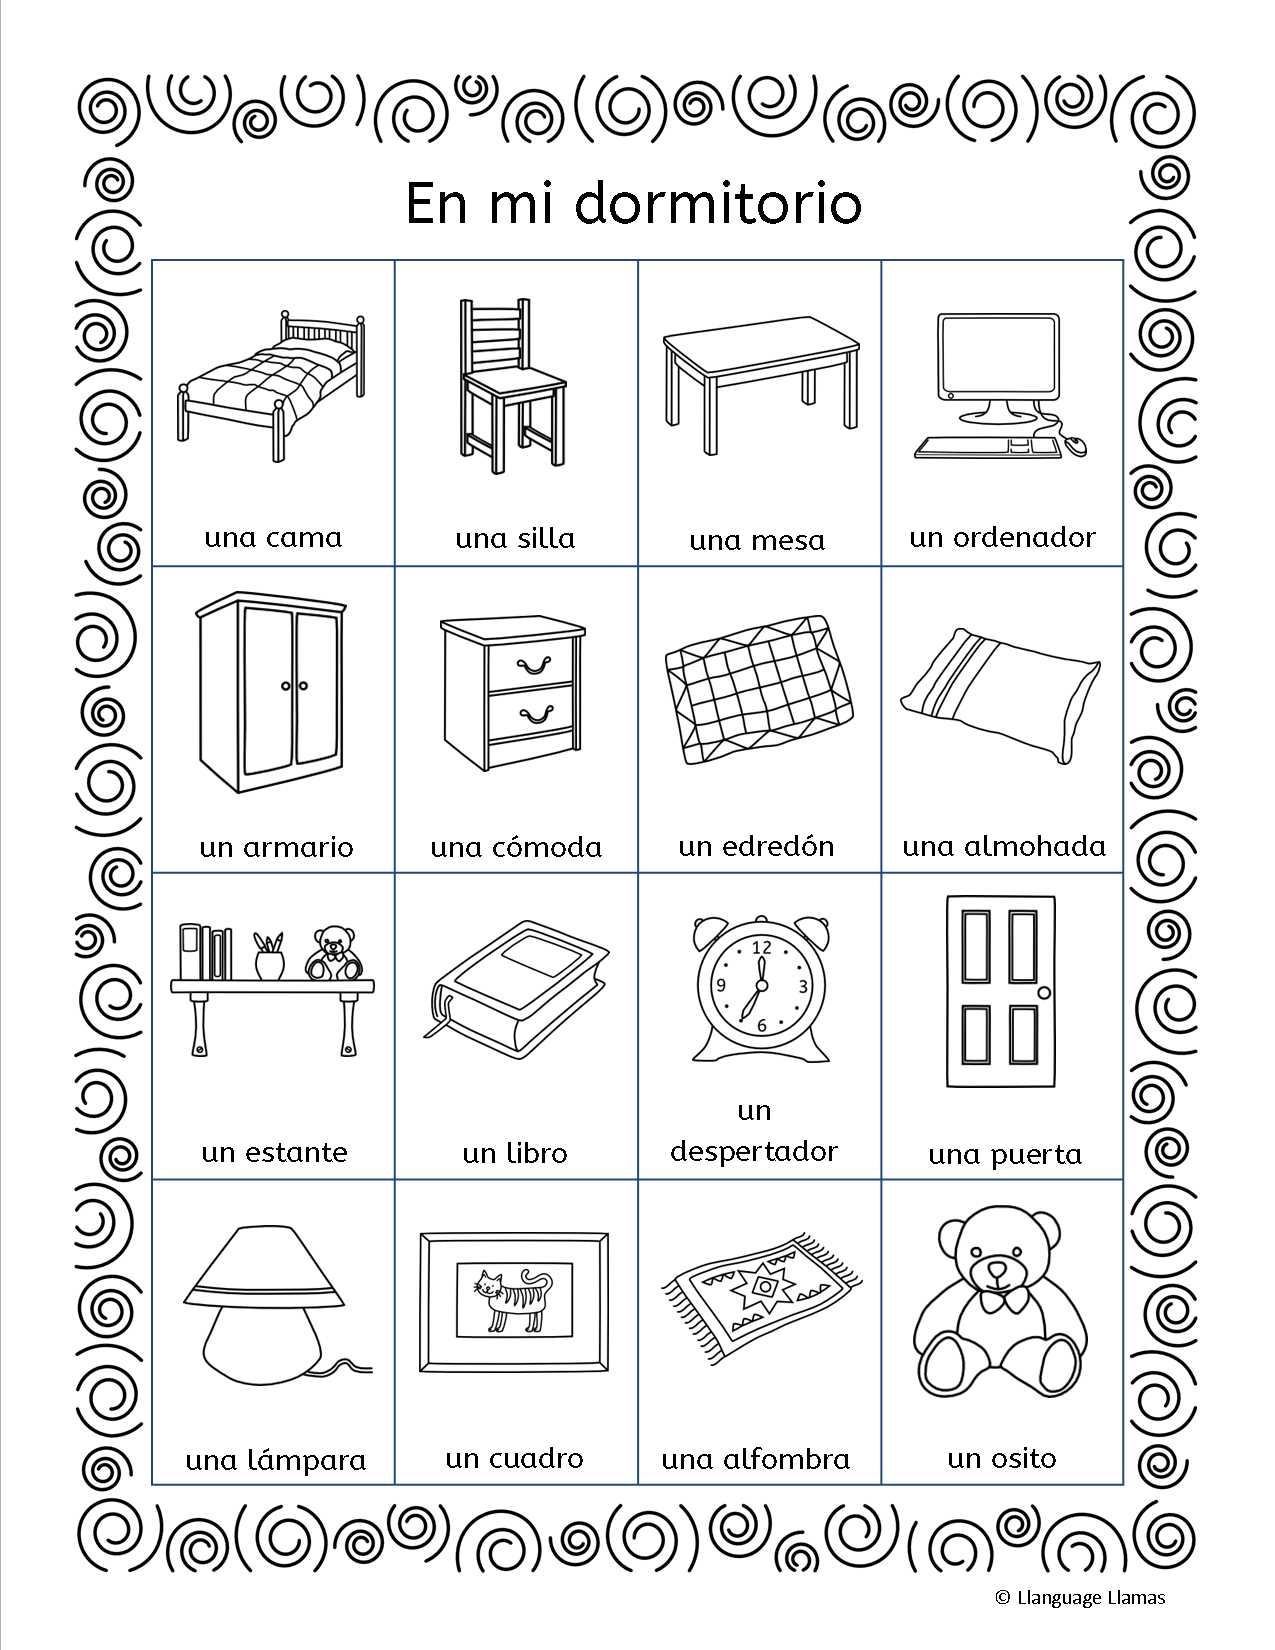 Spanish Lesson Worksheets as Well as Spanish Vocabulary Worksheets Image Collections Worksheet for Kids